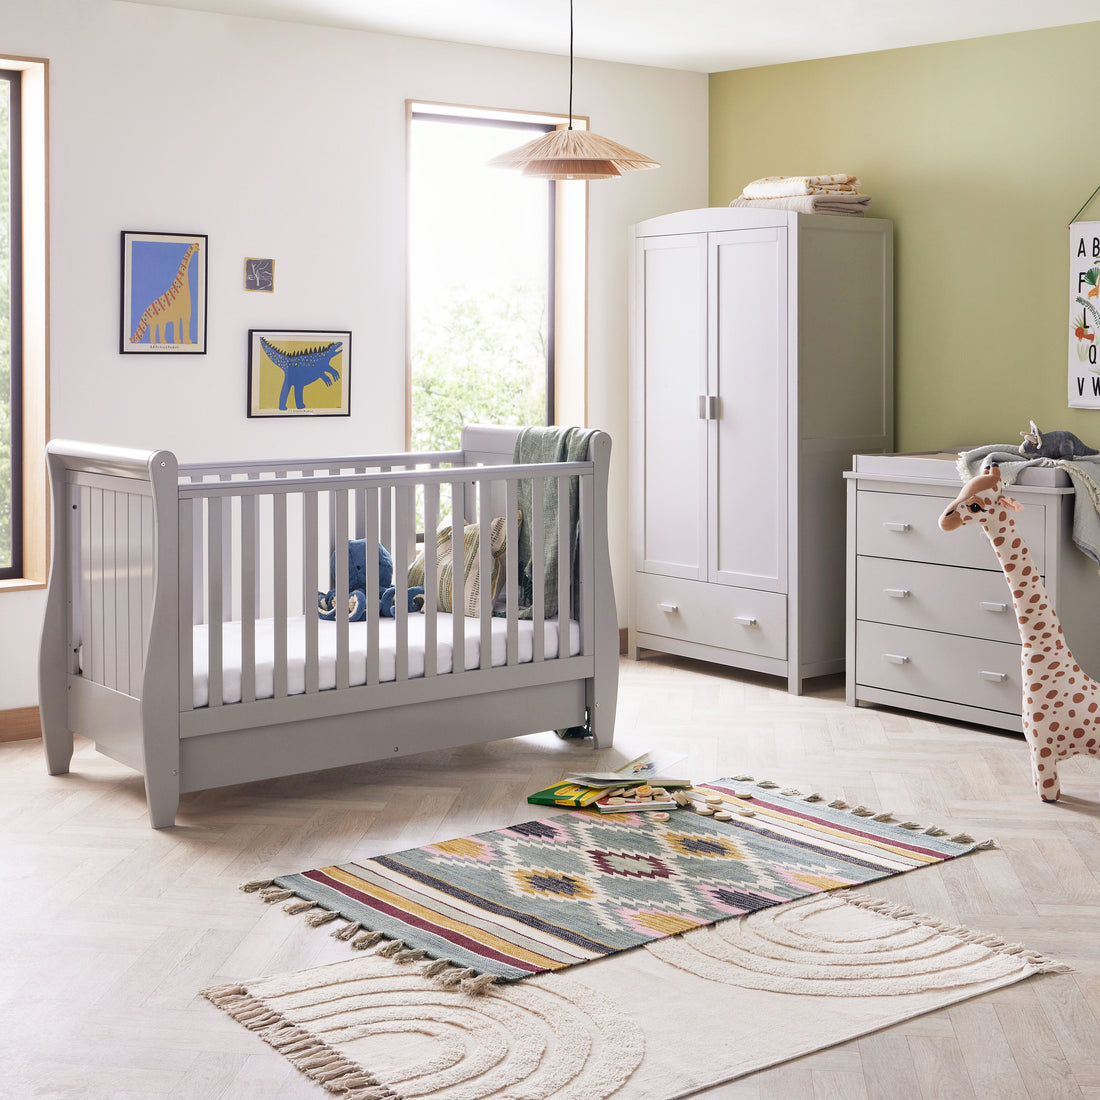 Discover the Best Baby Nursery Furniture for Your Little One